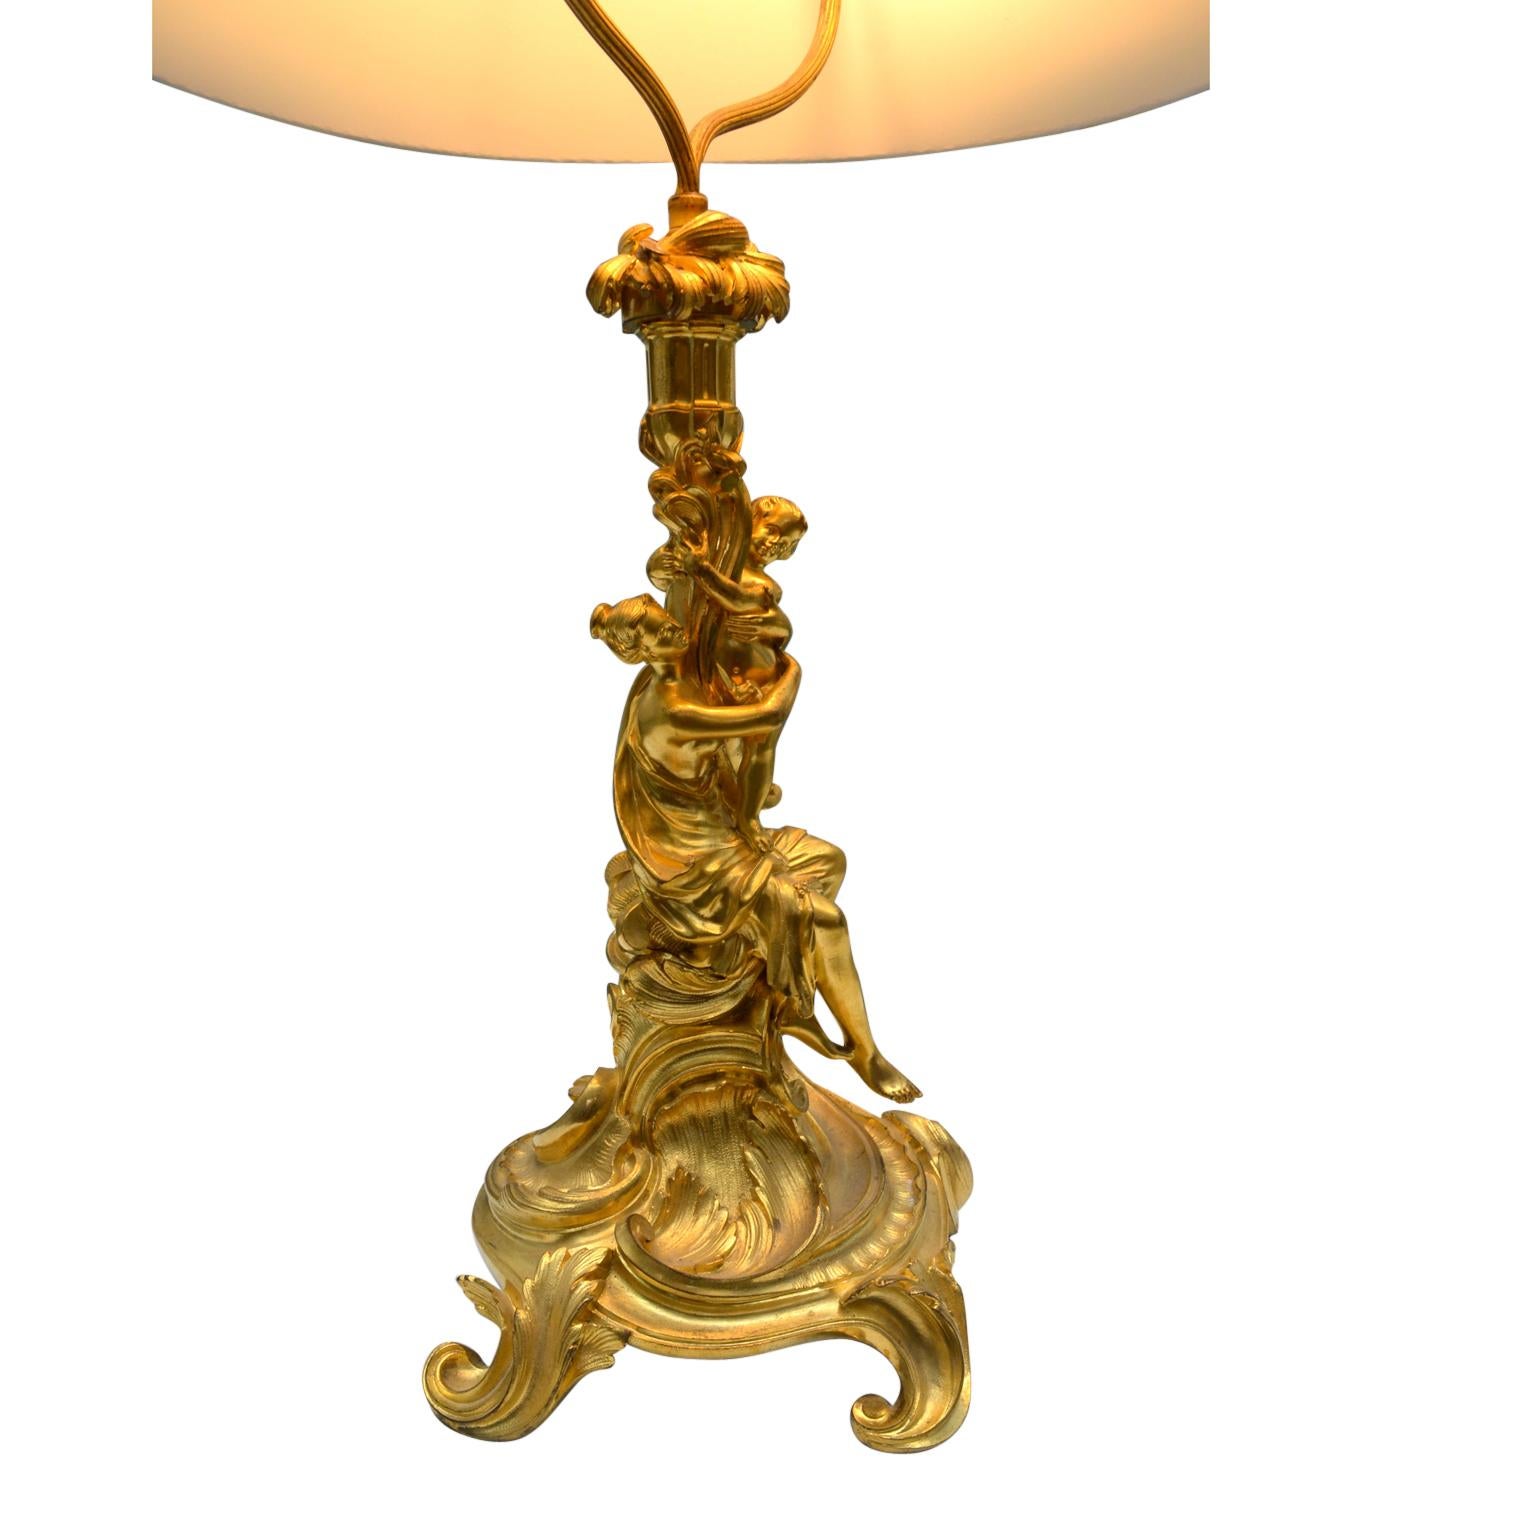 A French gilded bronze figural lamp featuring a standing classically draped lady with a cupid in her arms who further holds aloft a cornucopia containing the socket; the whole resting on a circular Rococo styled base.